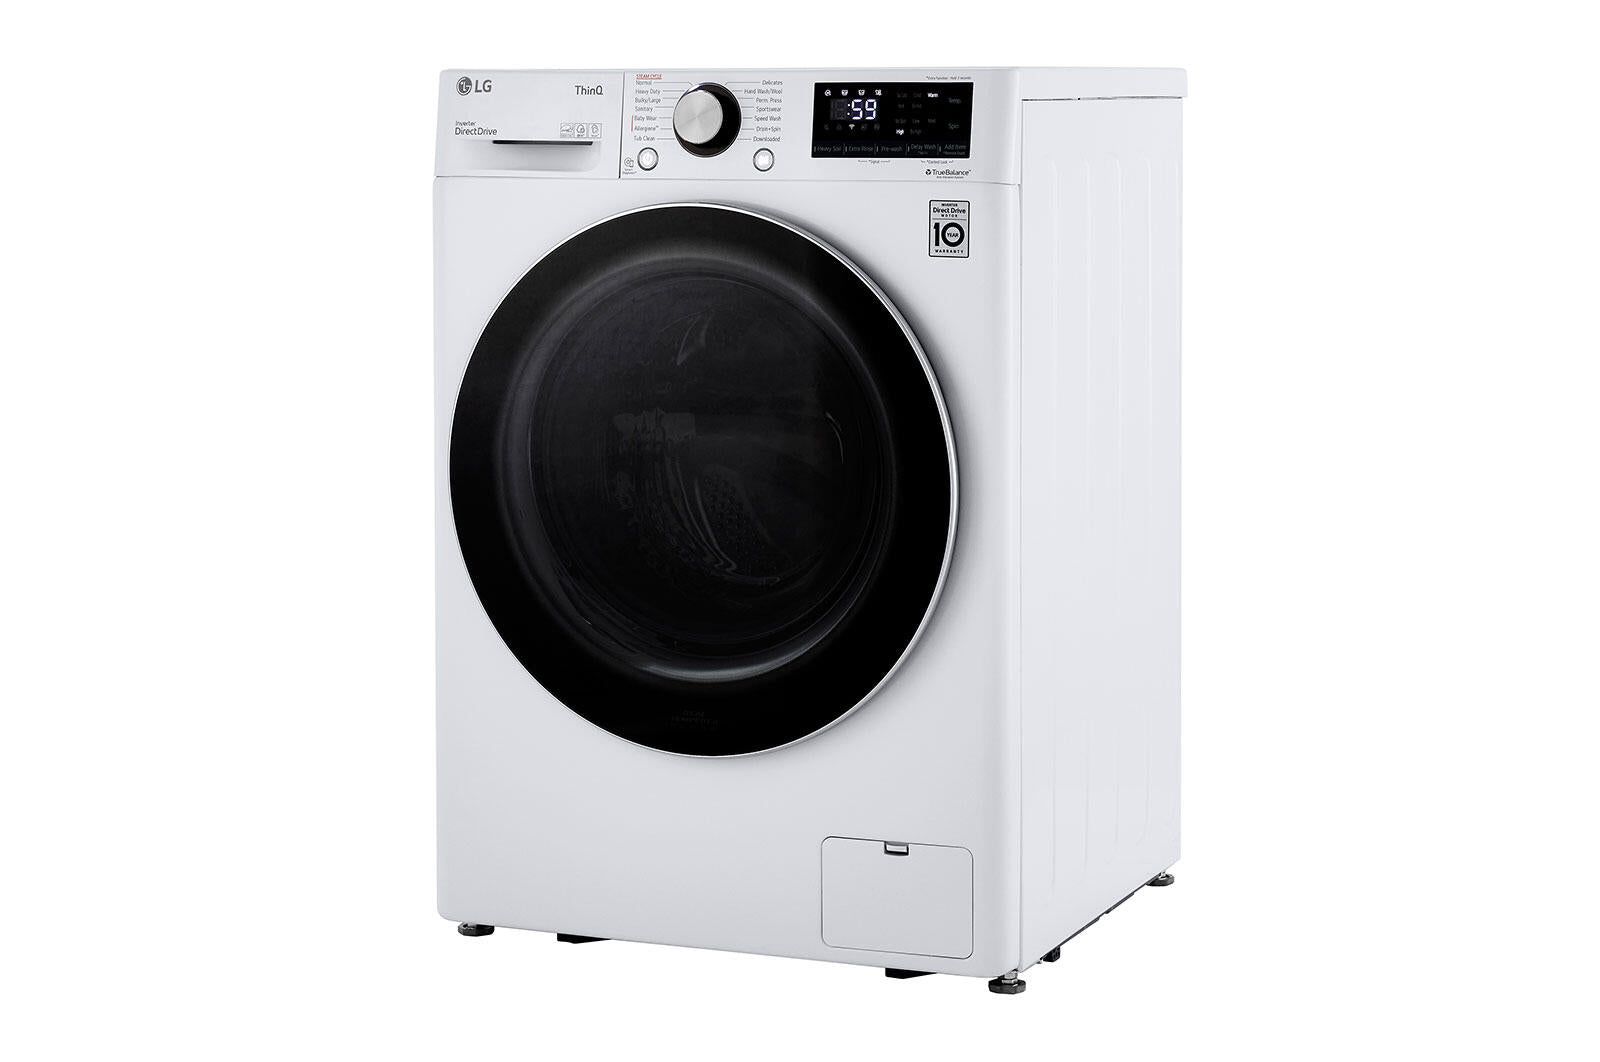 Best 12kg LG washing machine cover to protect your laundry